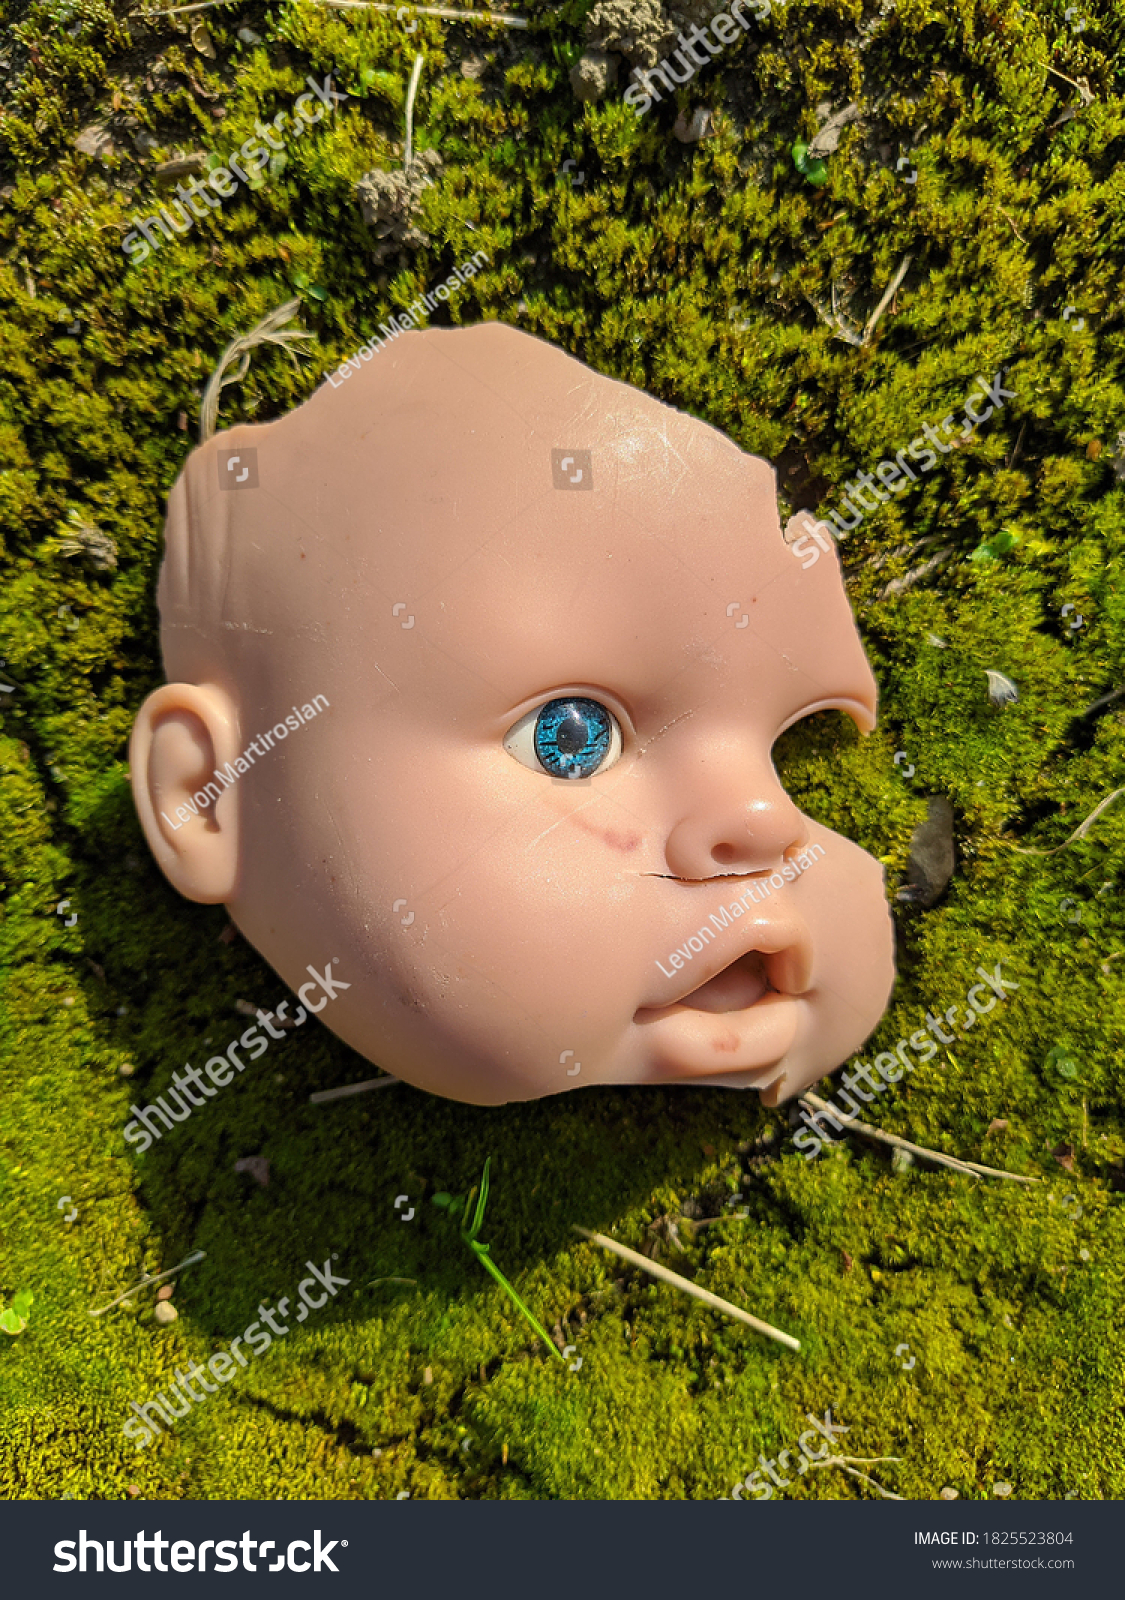 scary and broken doll face with one blue eye on a background of green moss in the forest in the autumn season #1825523804